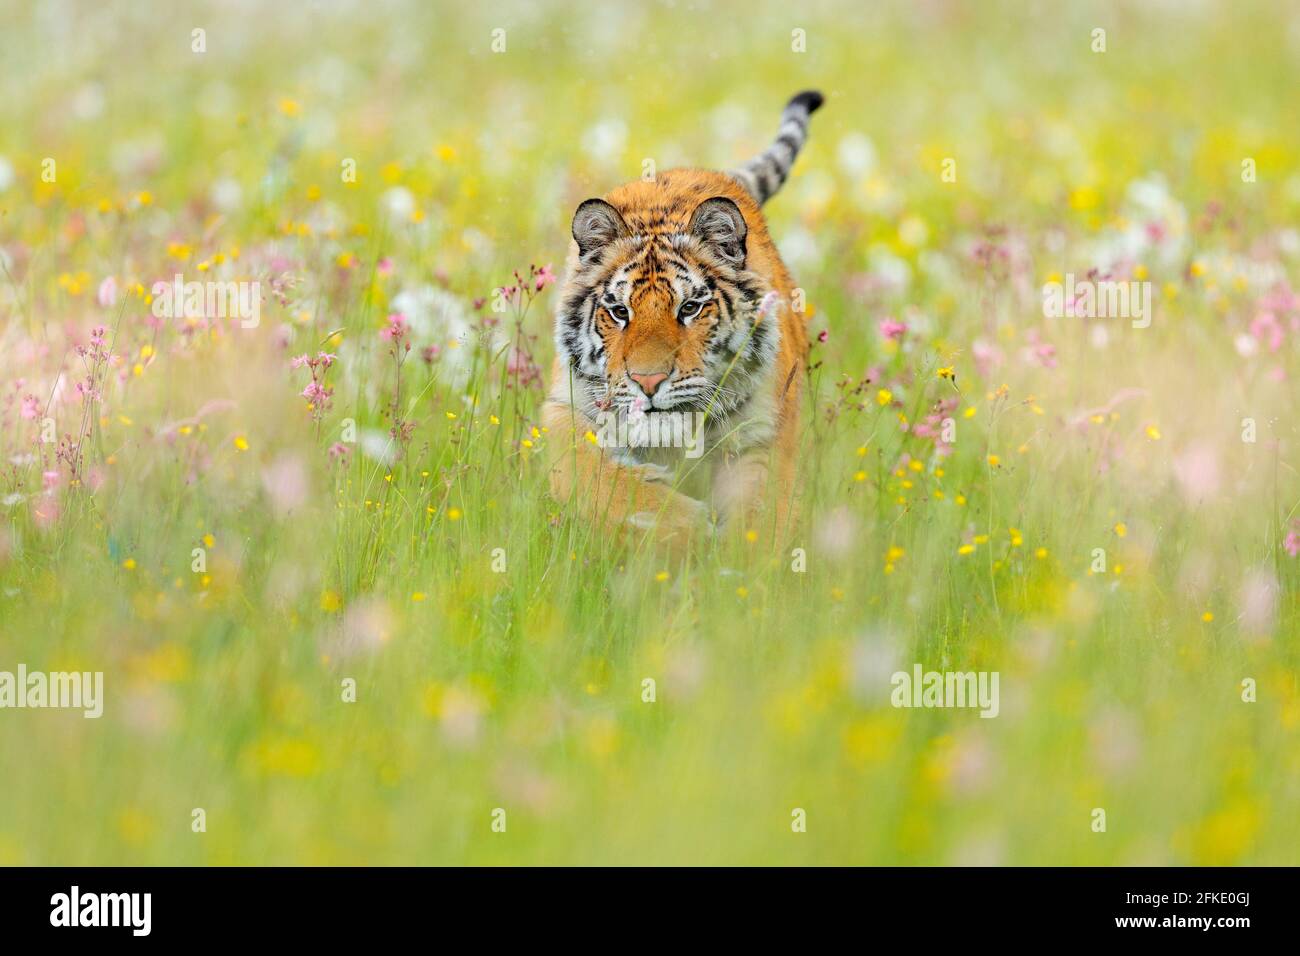 Tiger with pink and yellow flowers. Amur tiger walk in the cotton